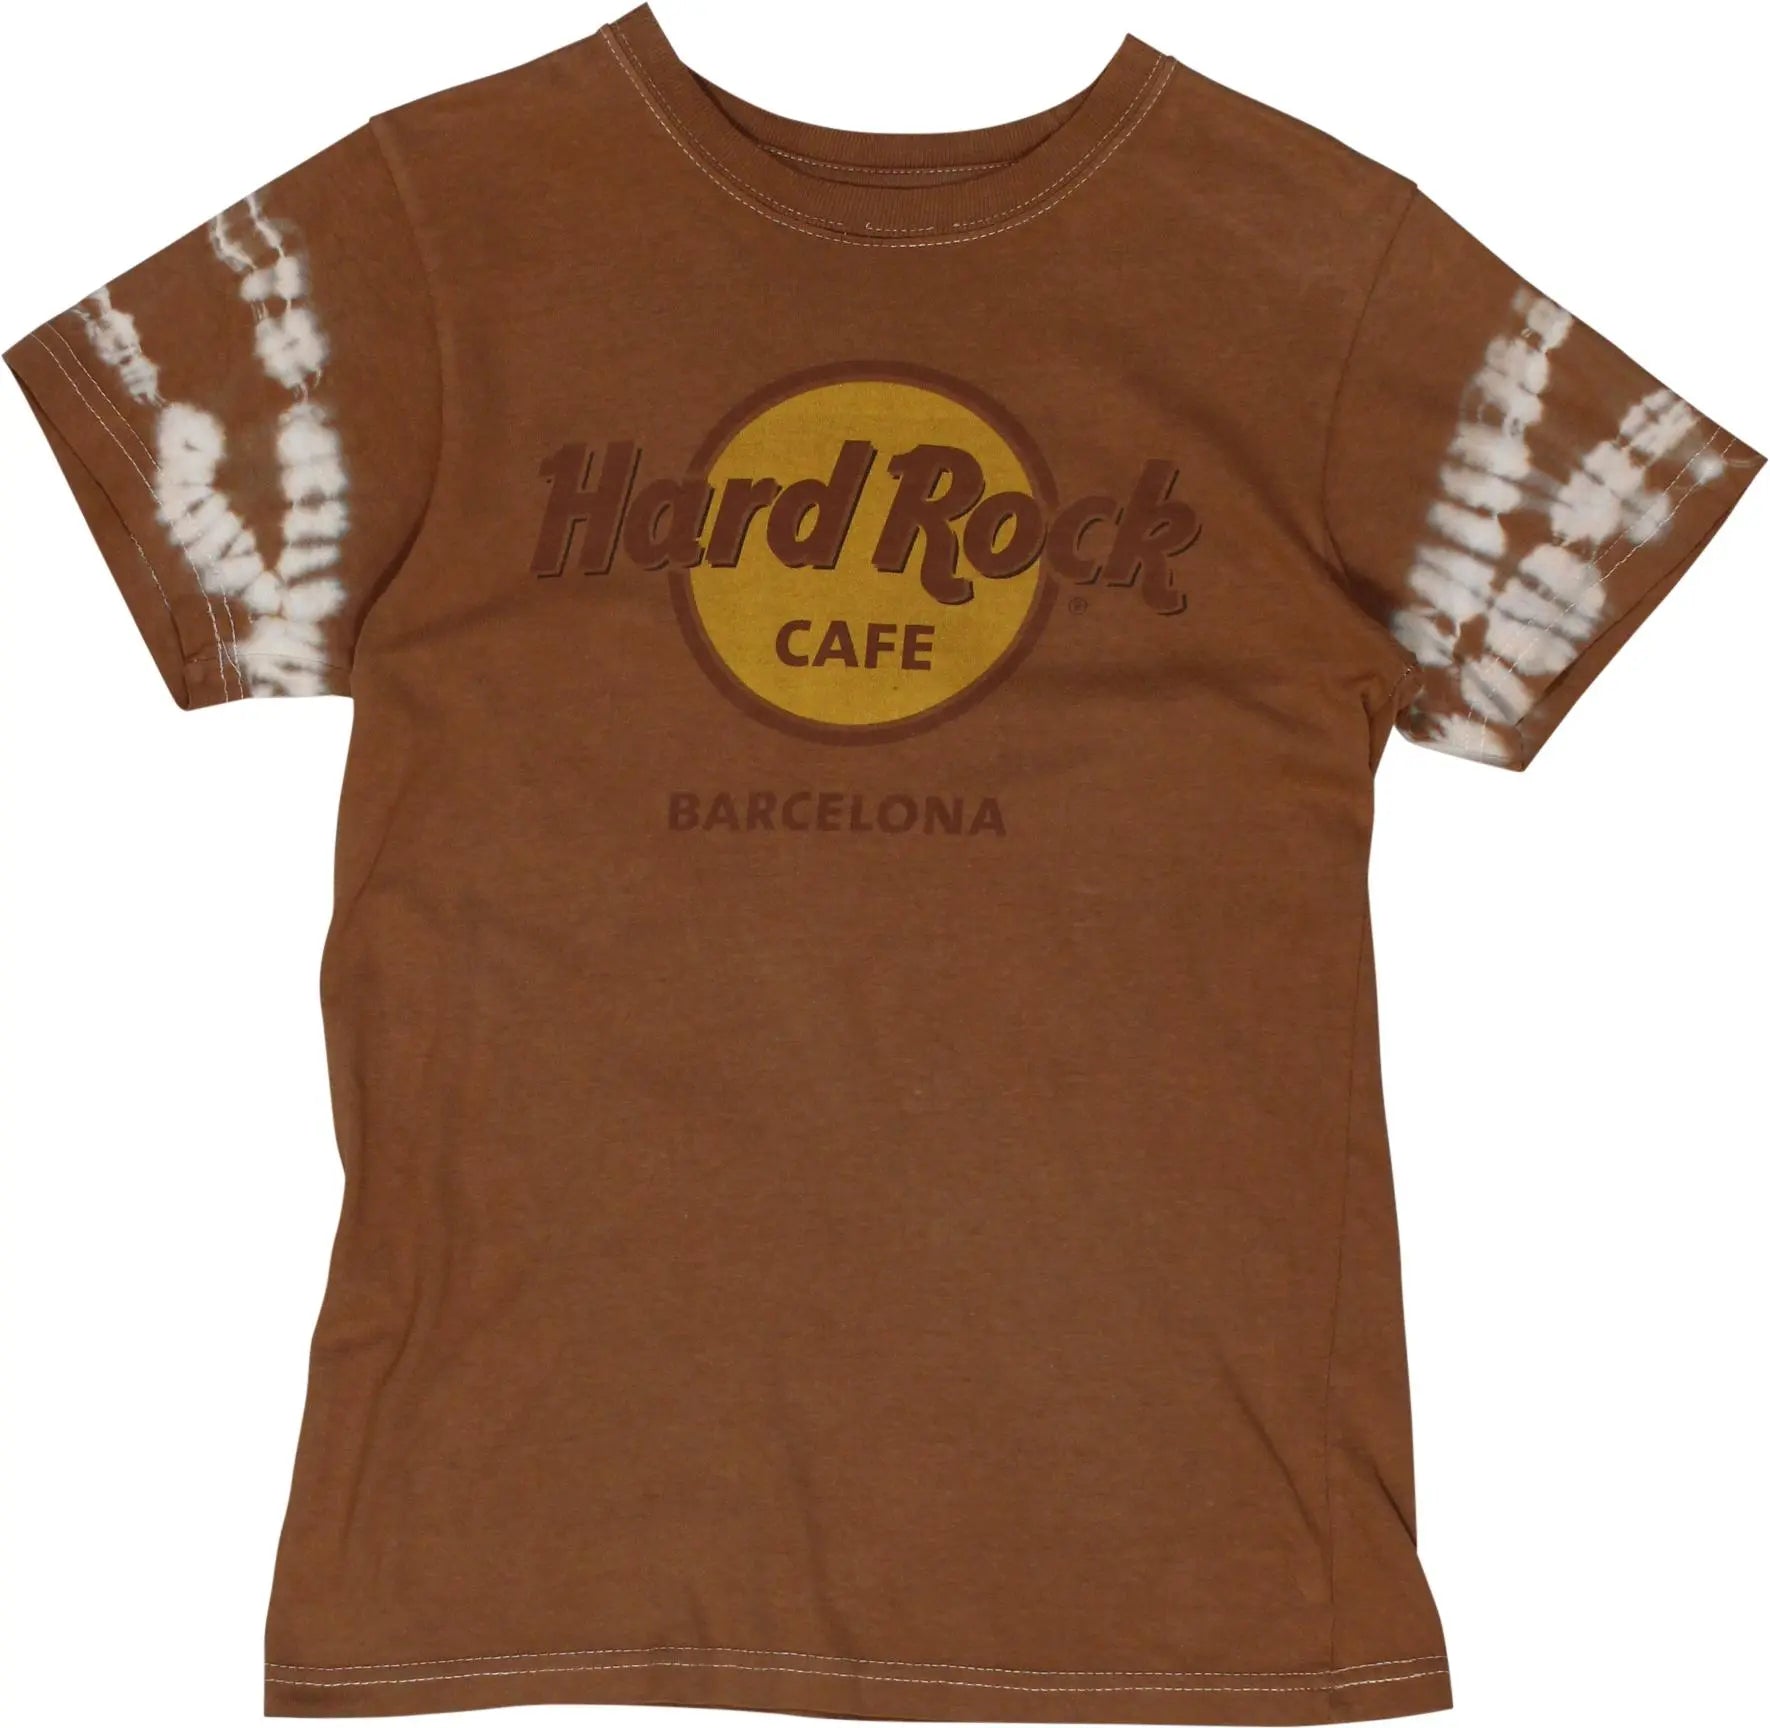 Hard Rock Cafe - T-Shirt- ThriftTale.com - Vintage and second handclothing